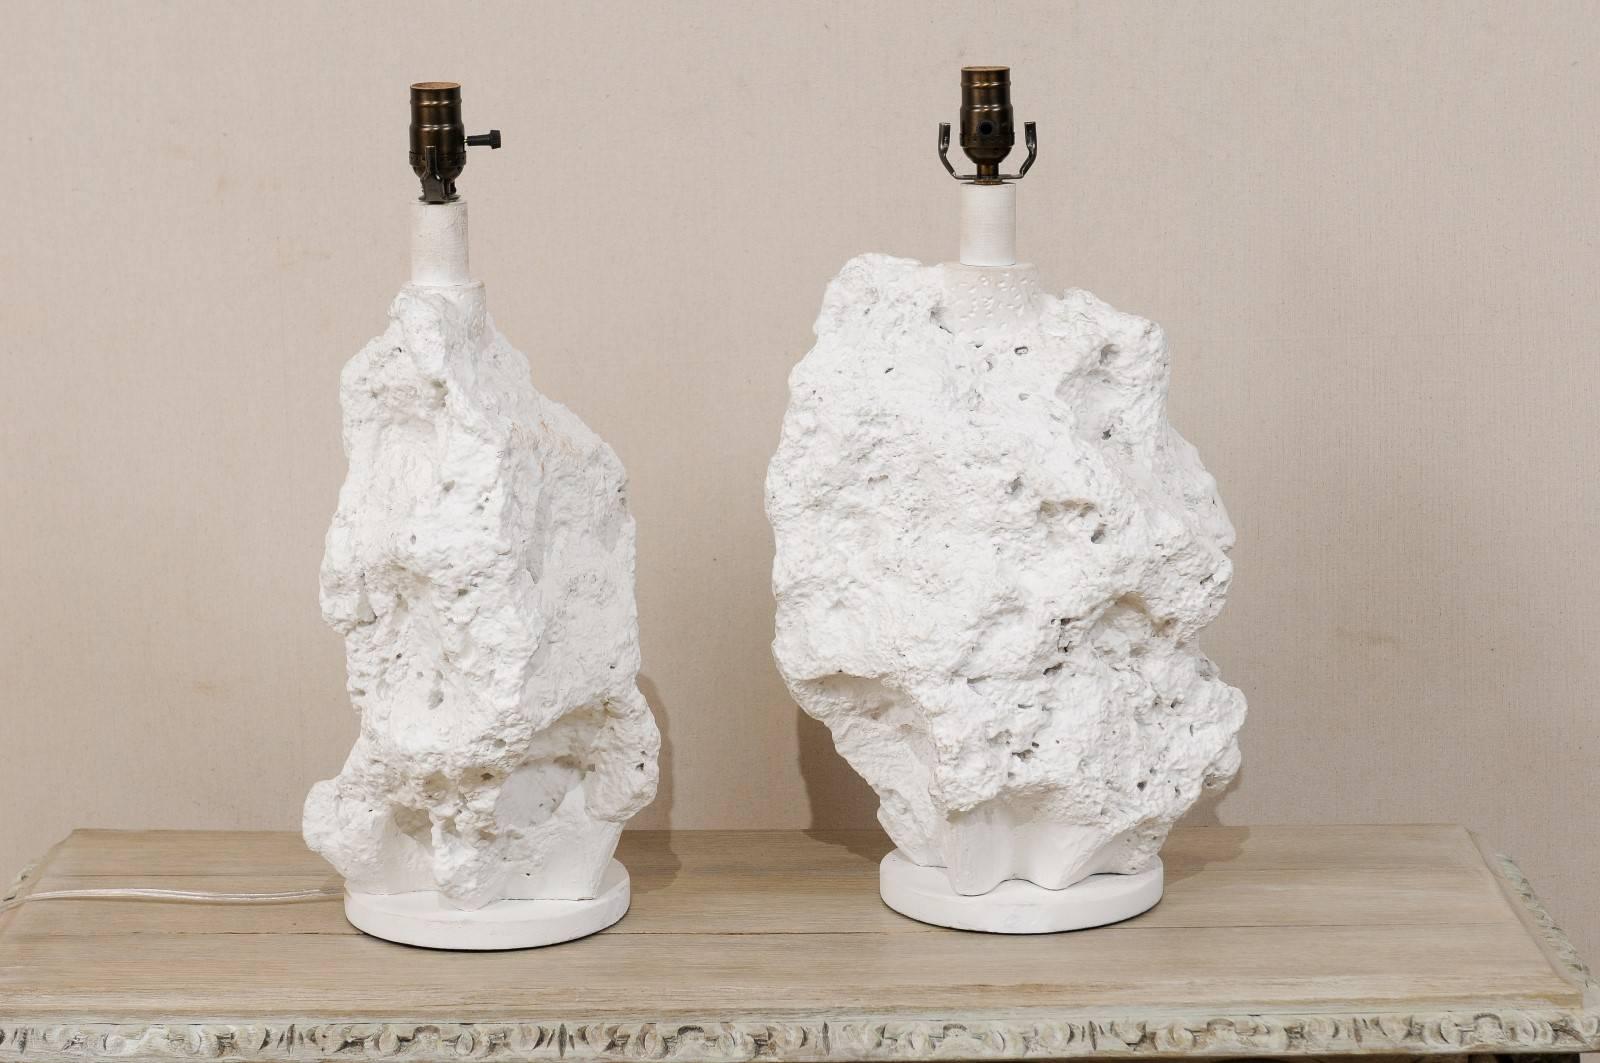 Pair of Sirmos Style White Table Lamps, Modern Sea Rock-Like Look of Plaster 1